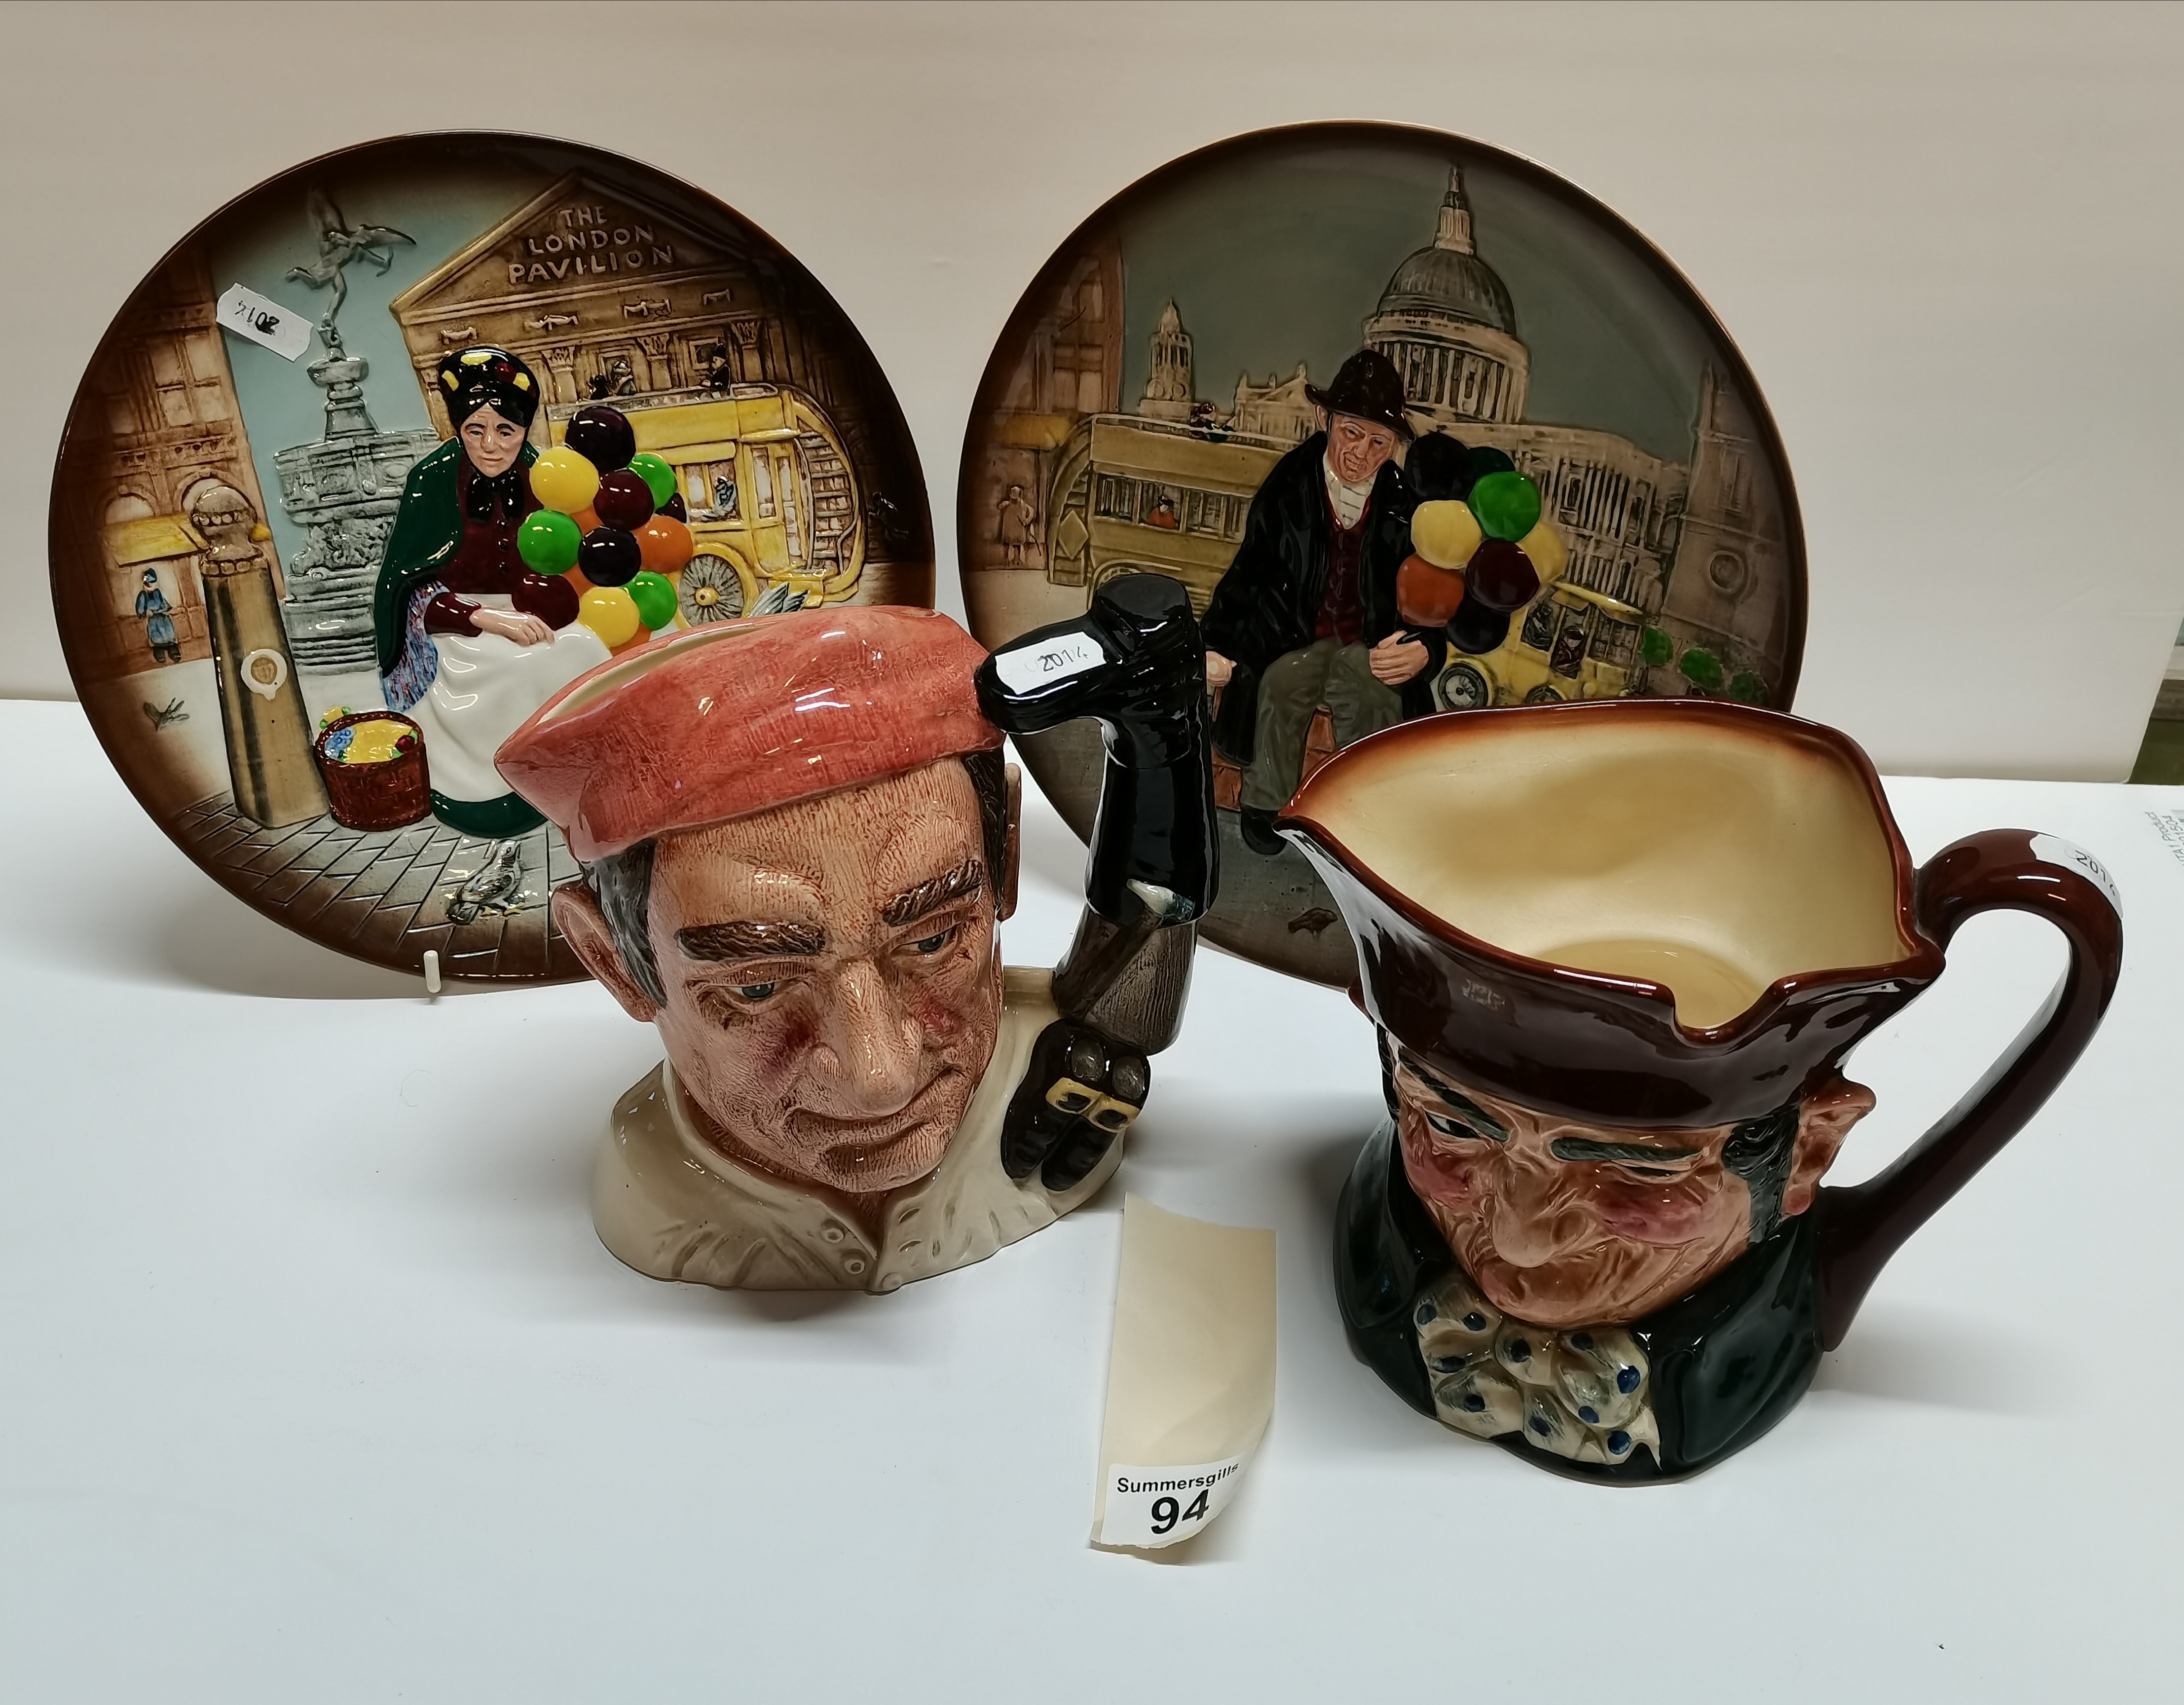 X2 Royal Doulton Toby Jugs plus x2 Royal Doulton plates Balloon Man and women - good condition - Image 2 of 2